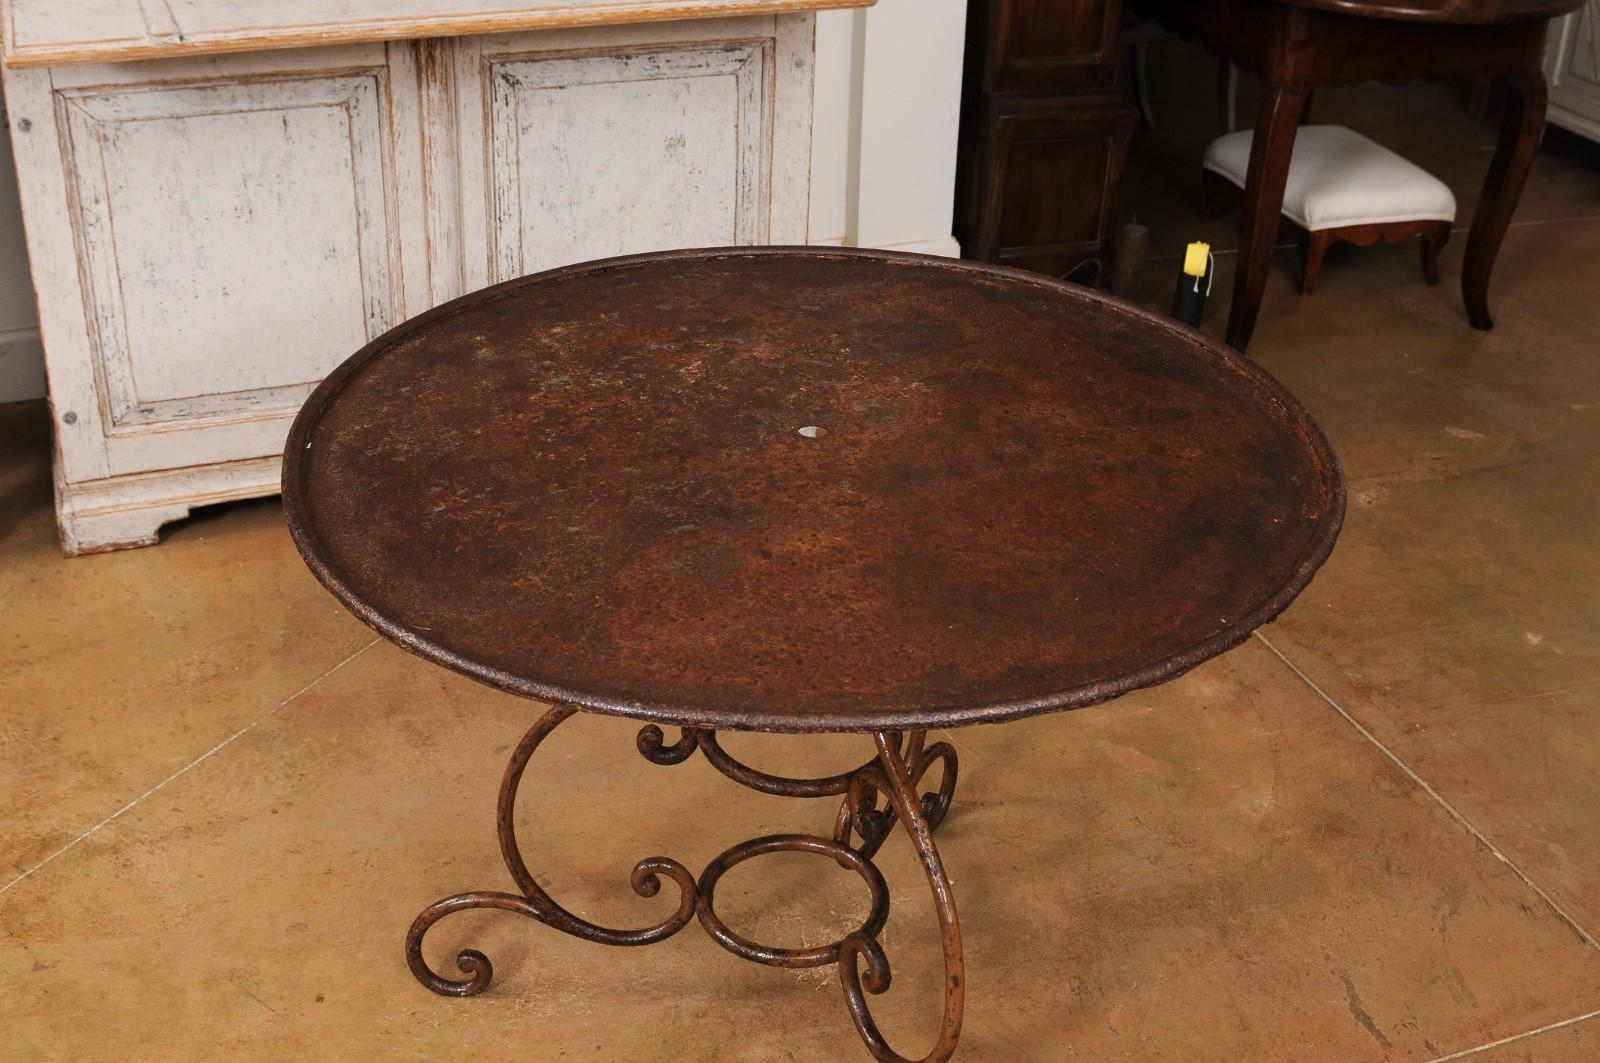 French 19th Century Round Iron Garden Table with Scrolling Base and Rusty Finish For Sale 9